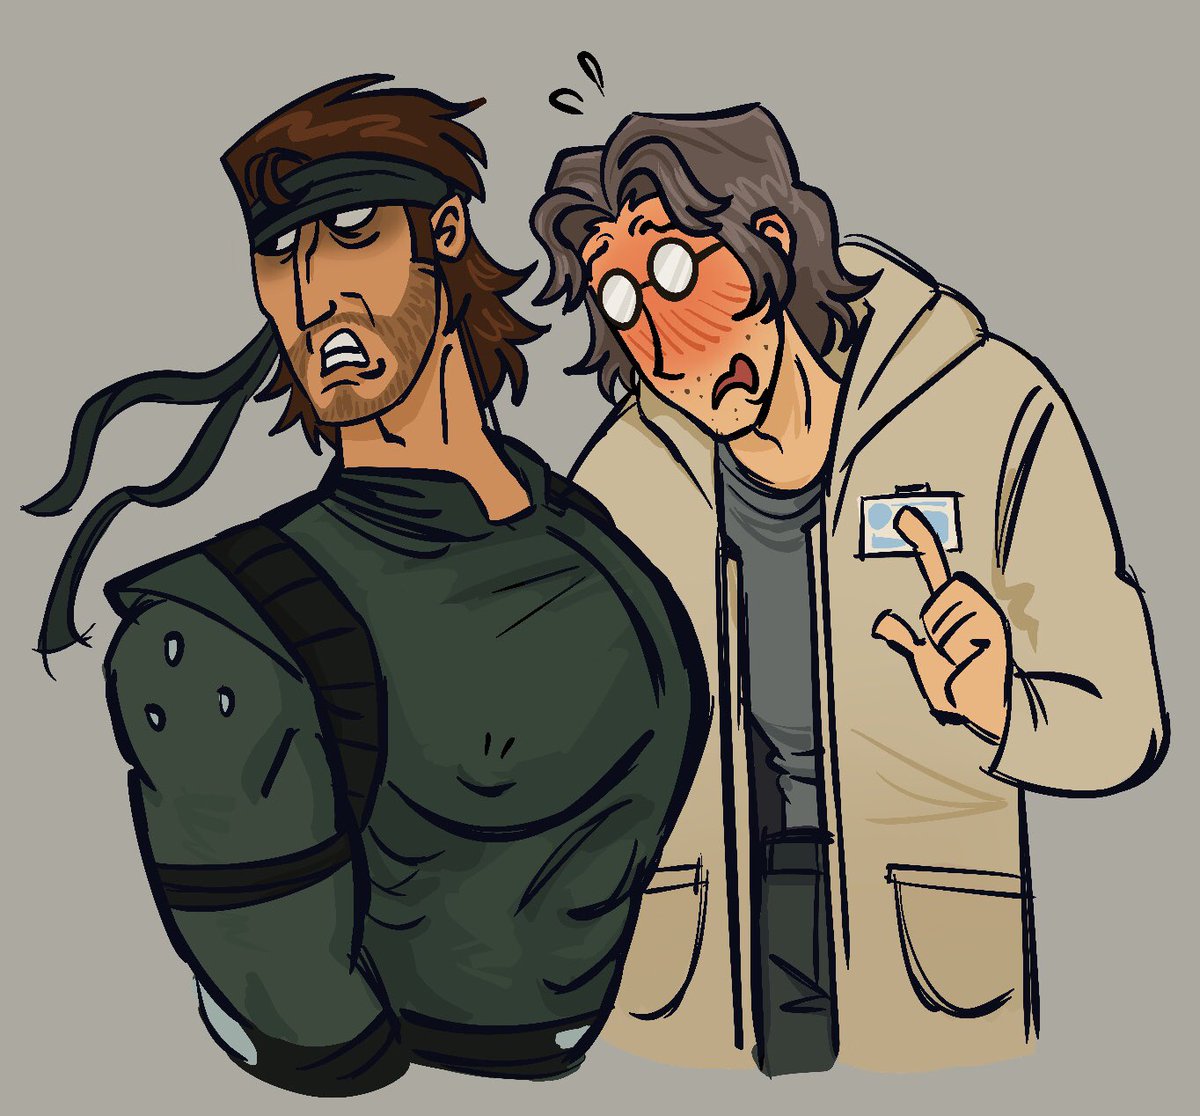 Request for @shmepoe !! I quickly cooked this up #mgs #otasune